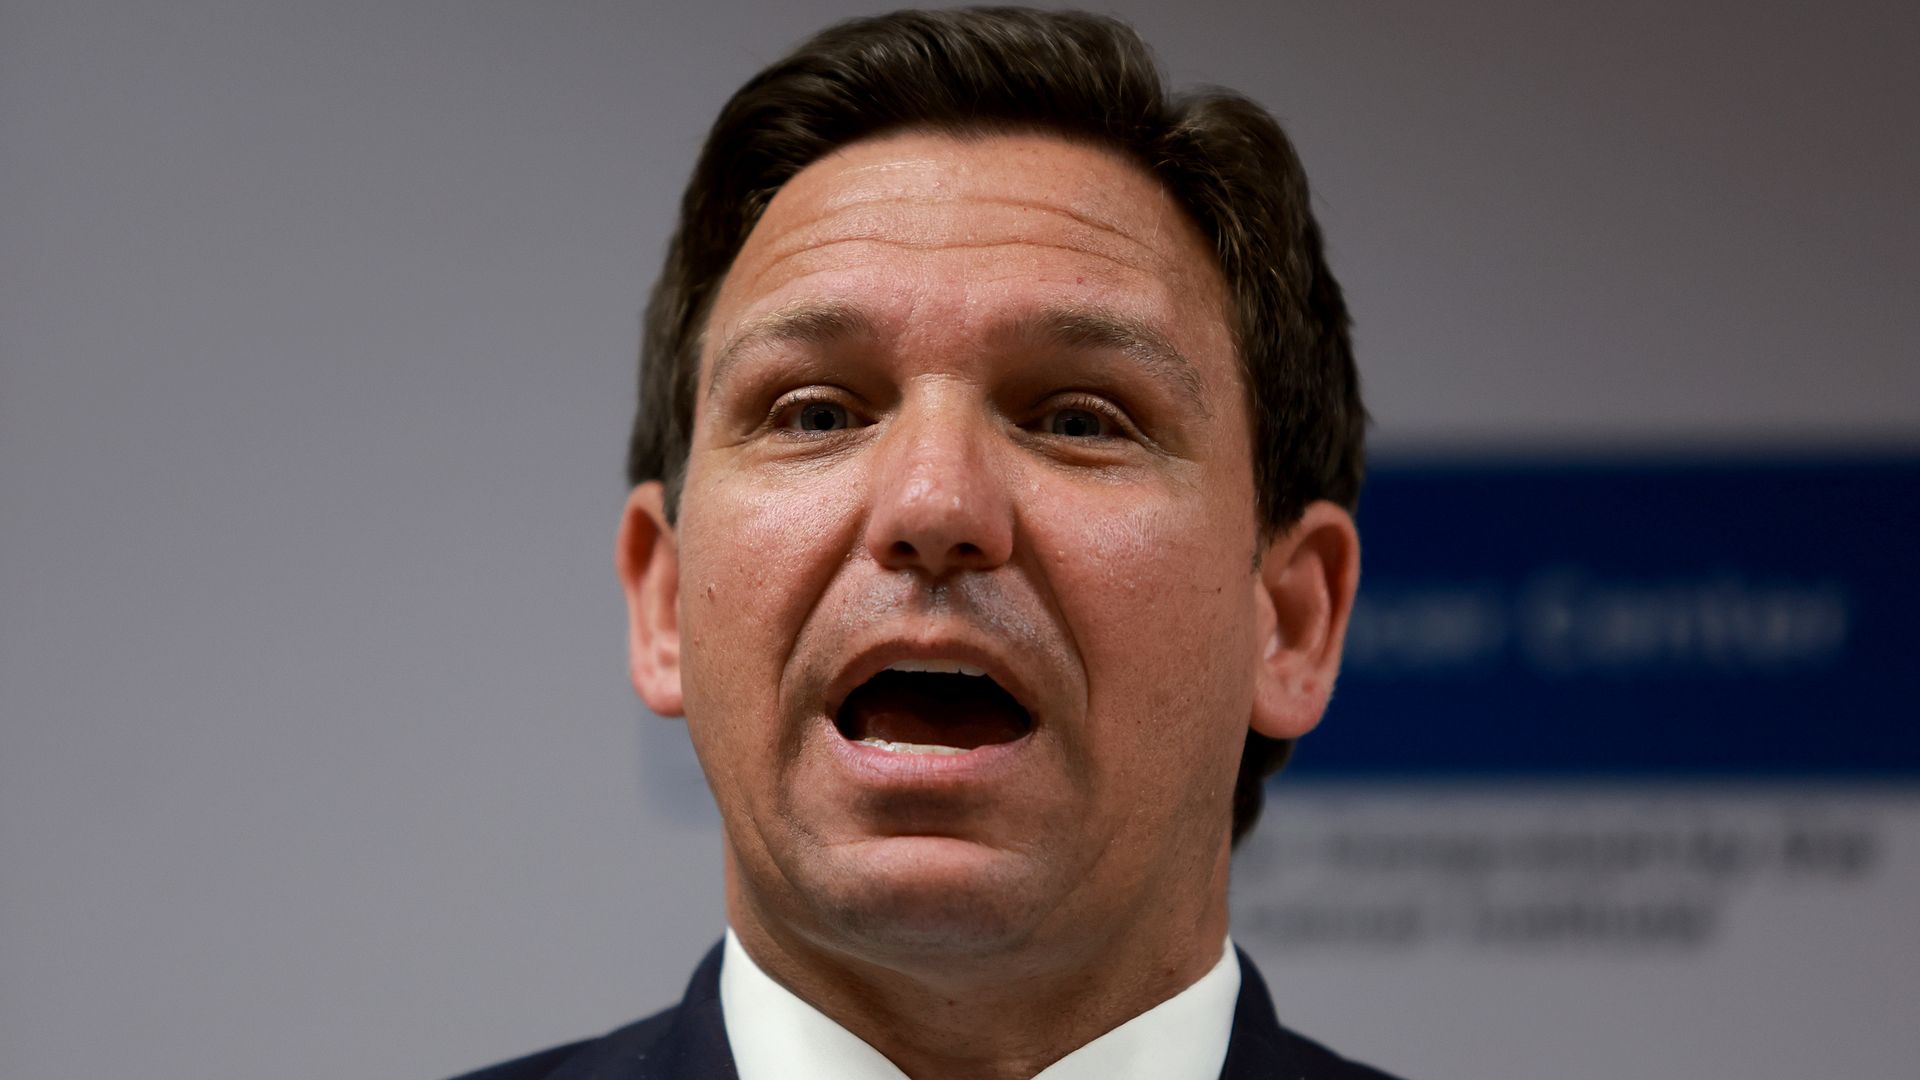 Florida Gov. Ron DeSantis speaks during a press conference at the University of Miami Health System.